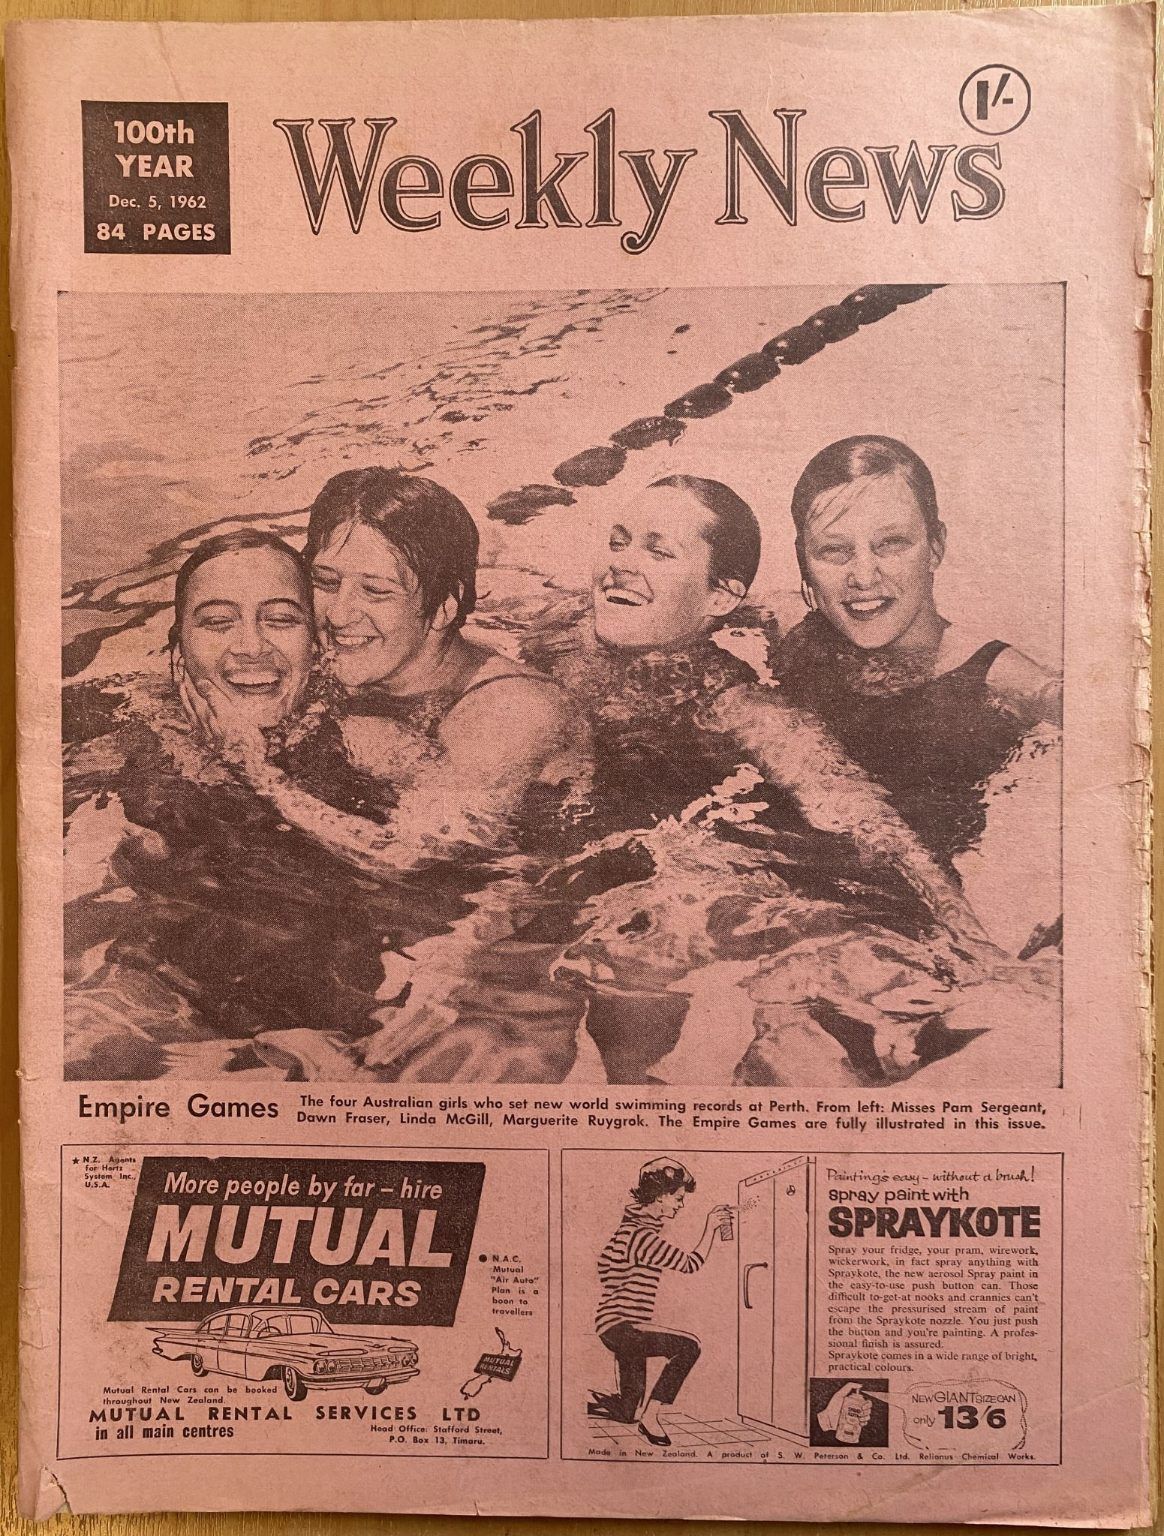 OLD NEWSPAPER: The Weekly News, No. 5167, 5 December 1962